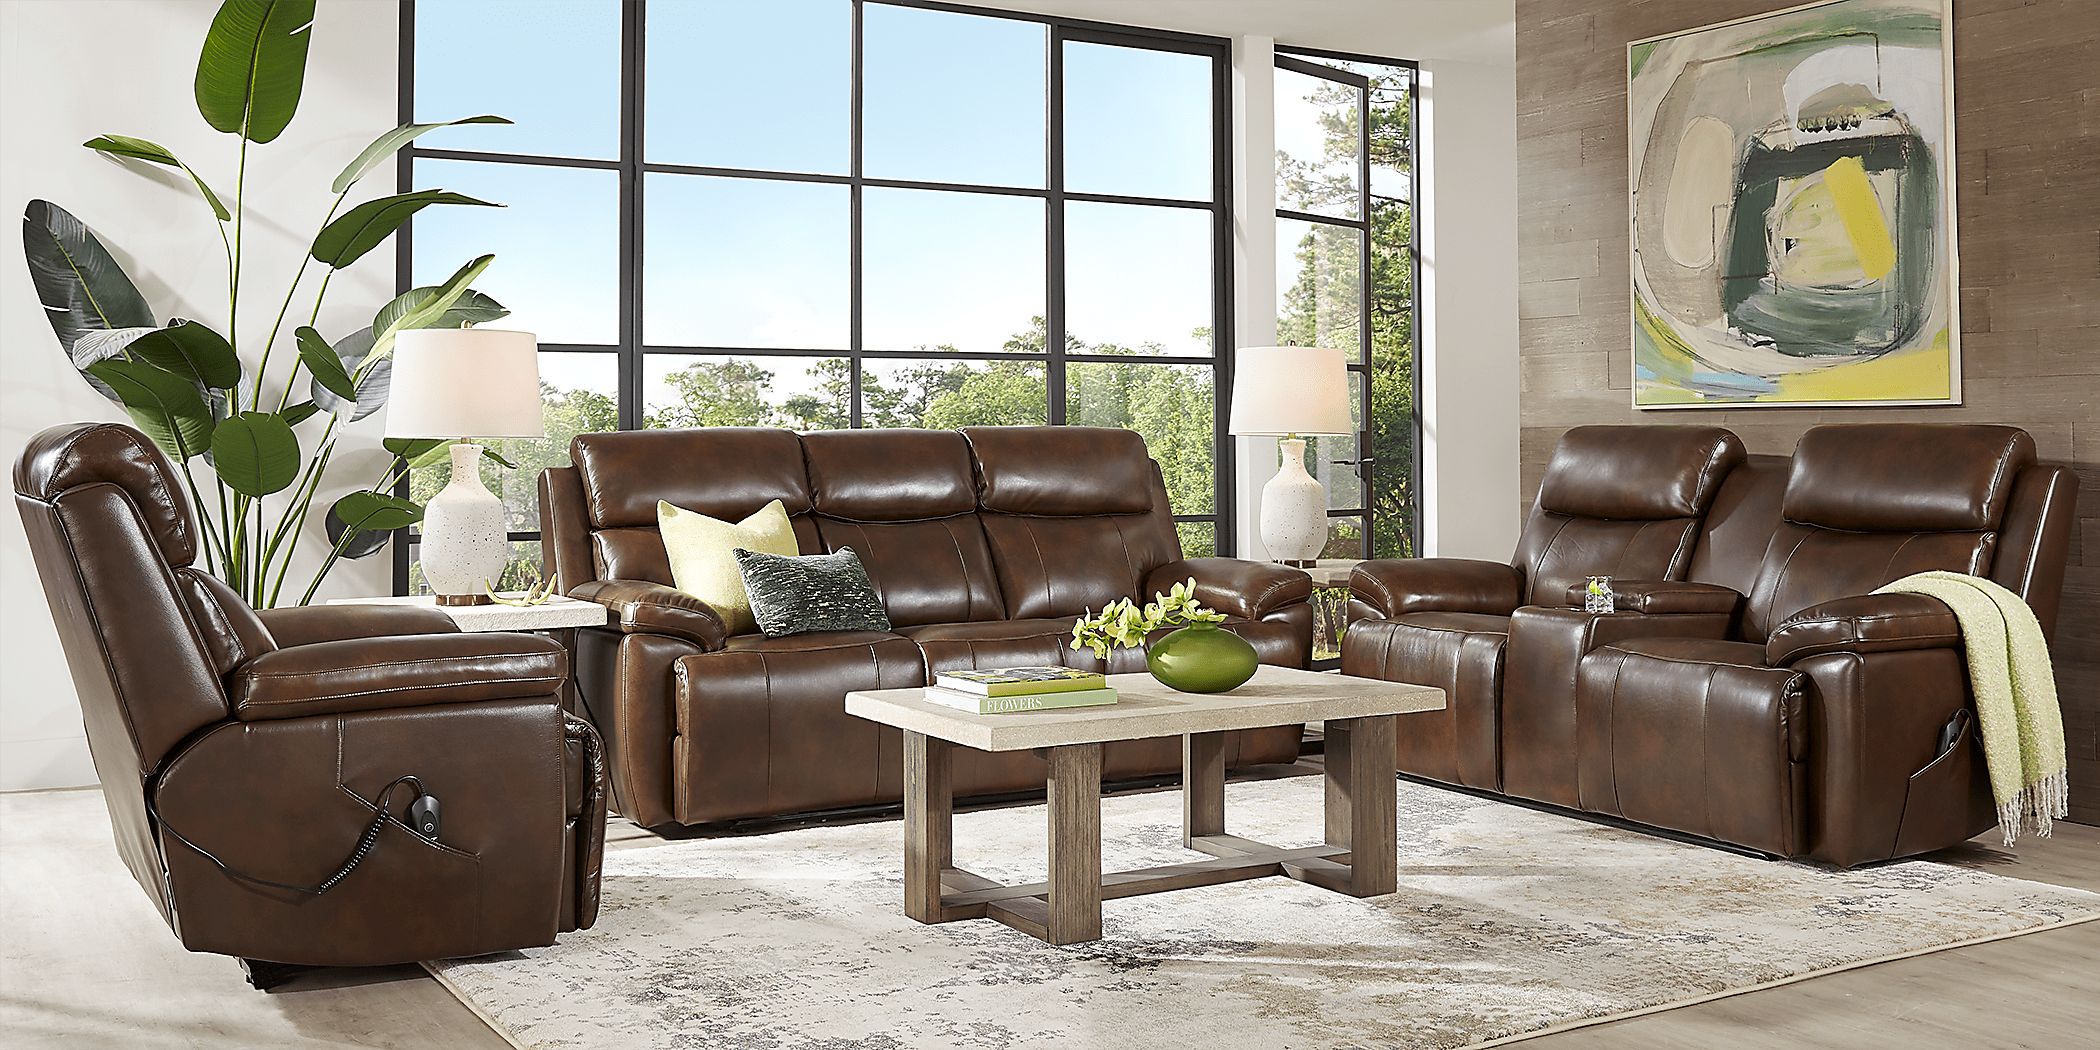 Barolo Brown Leather 7 Pc Triple Power Reclining Living Room with Massage and Heat